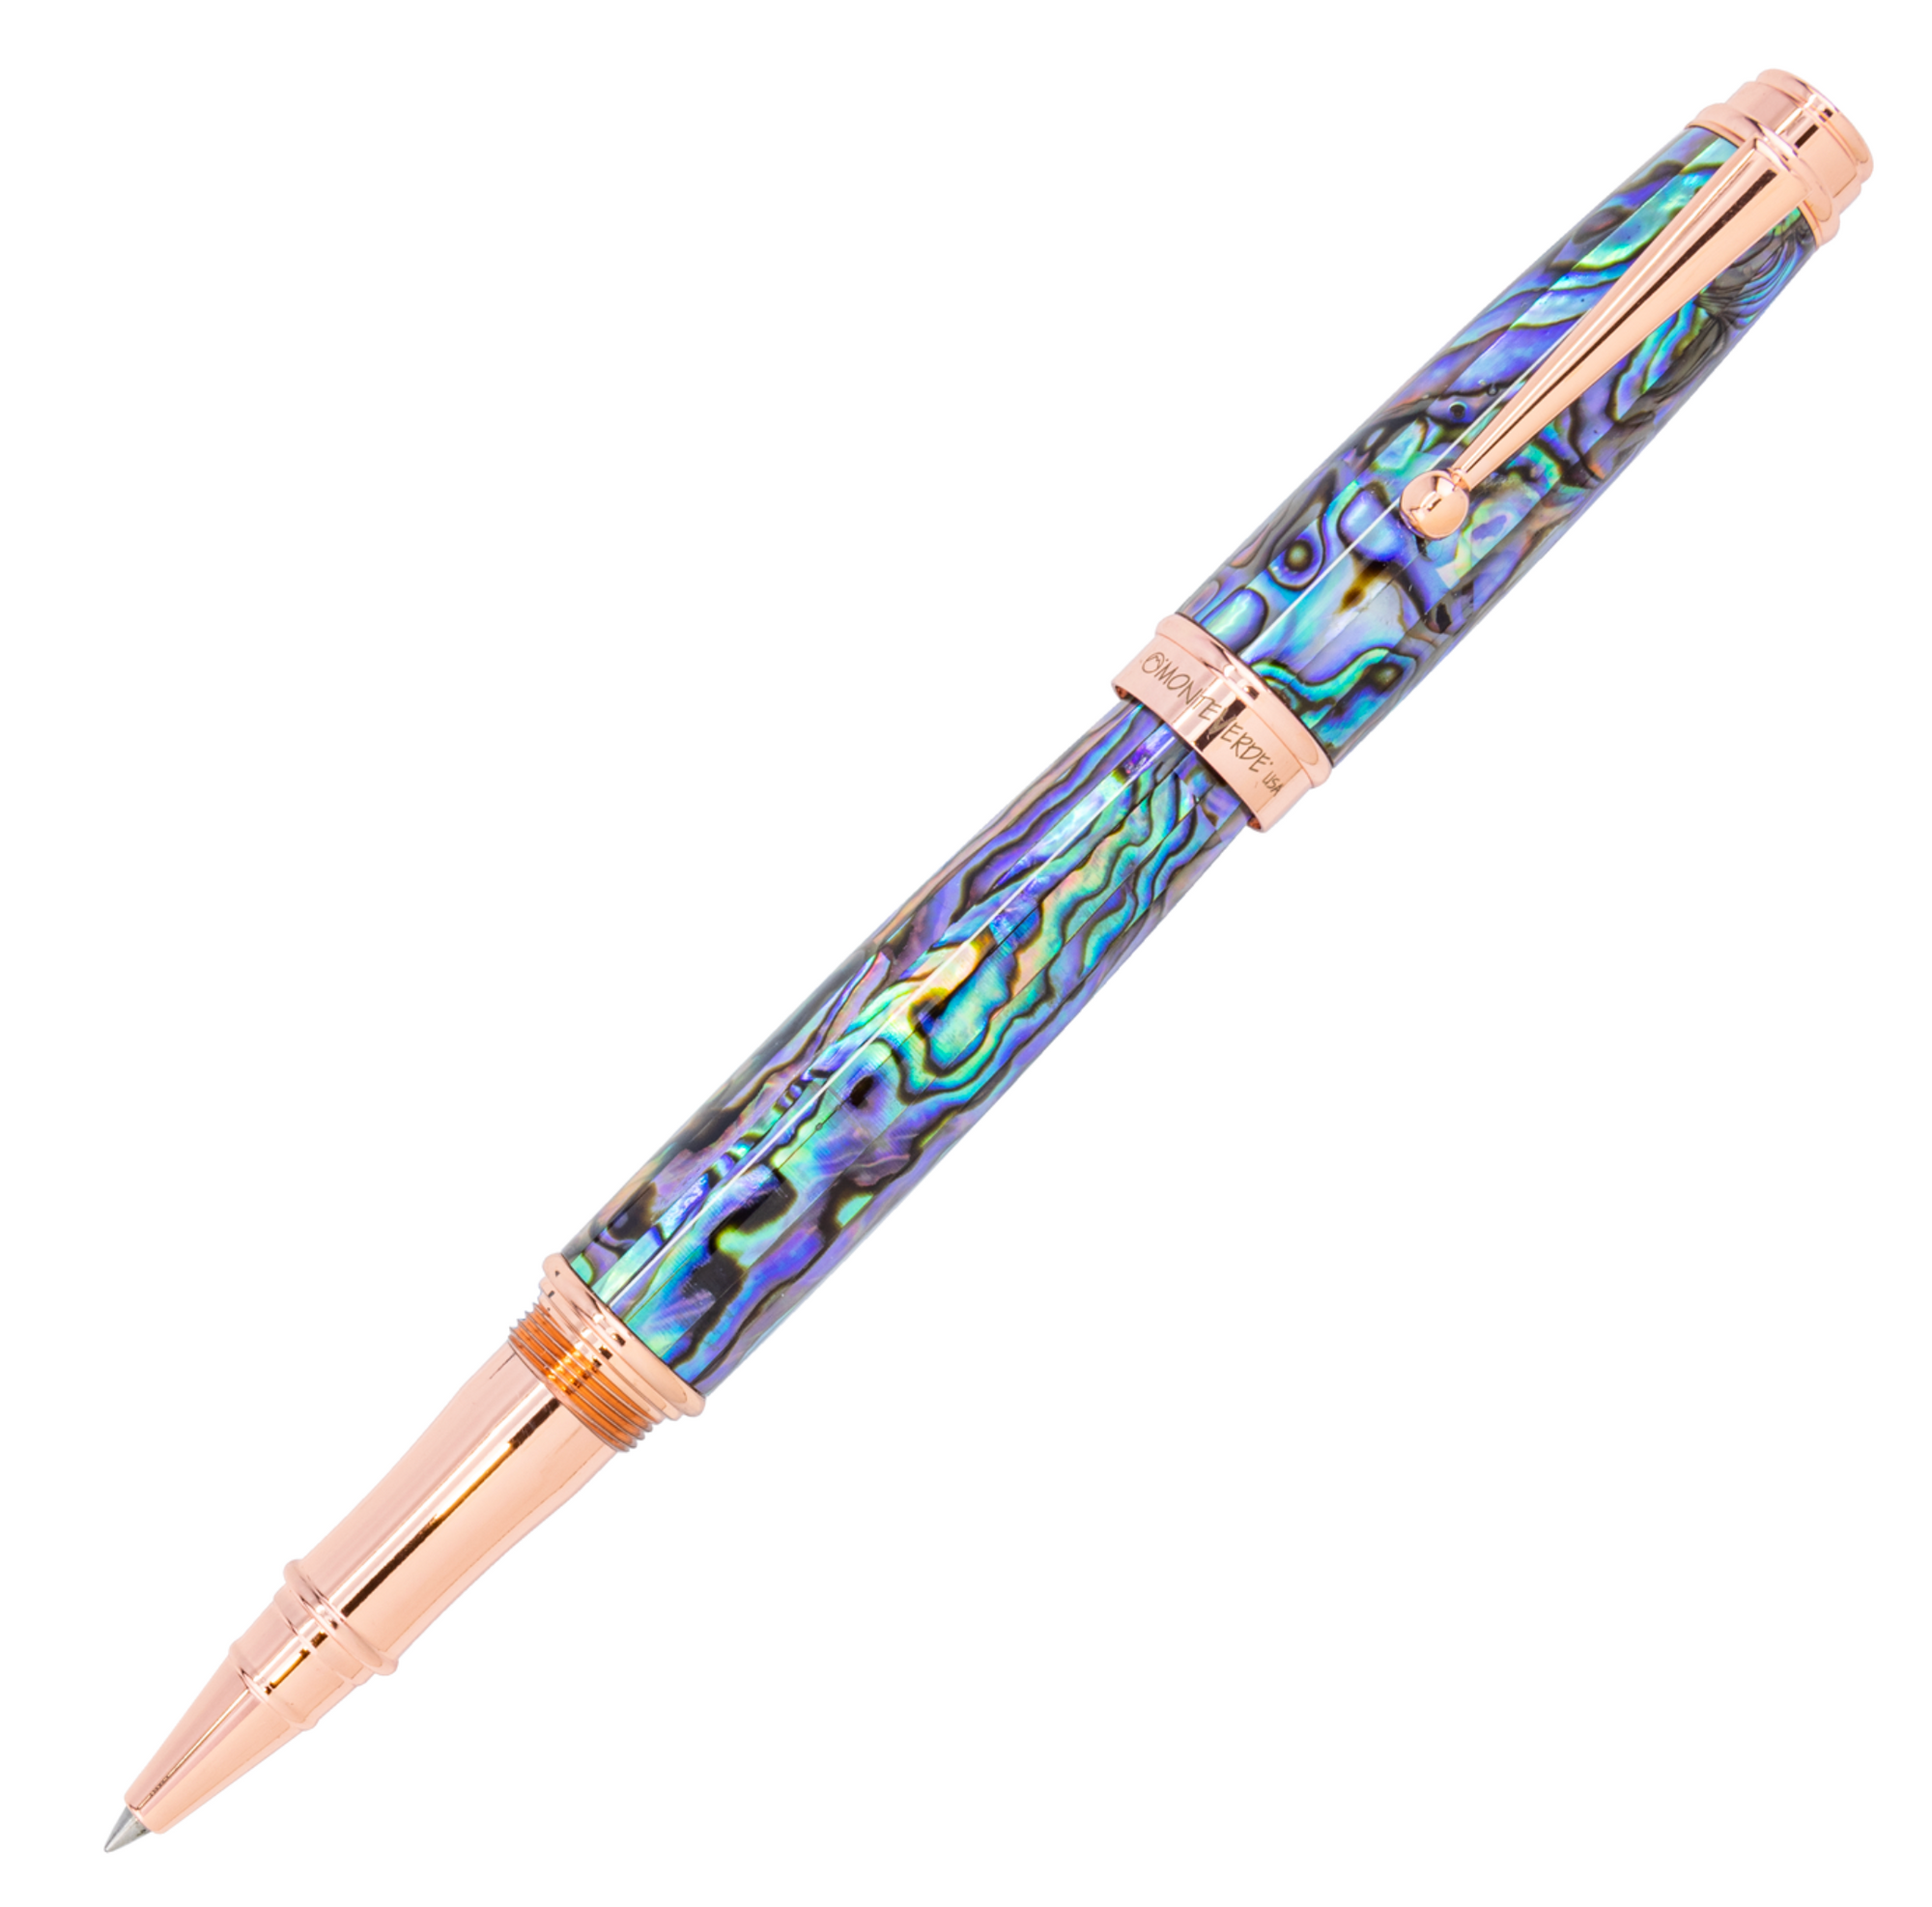 Monteverde Invincia Deluxe Abalone Rollerball Rose Gold Trim (Released Aug 2022)